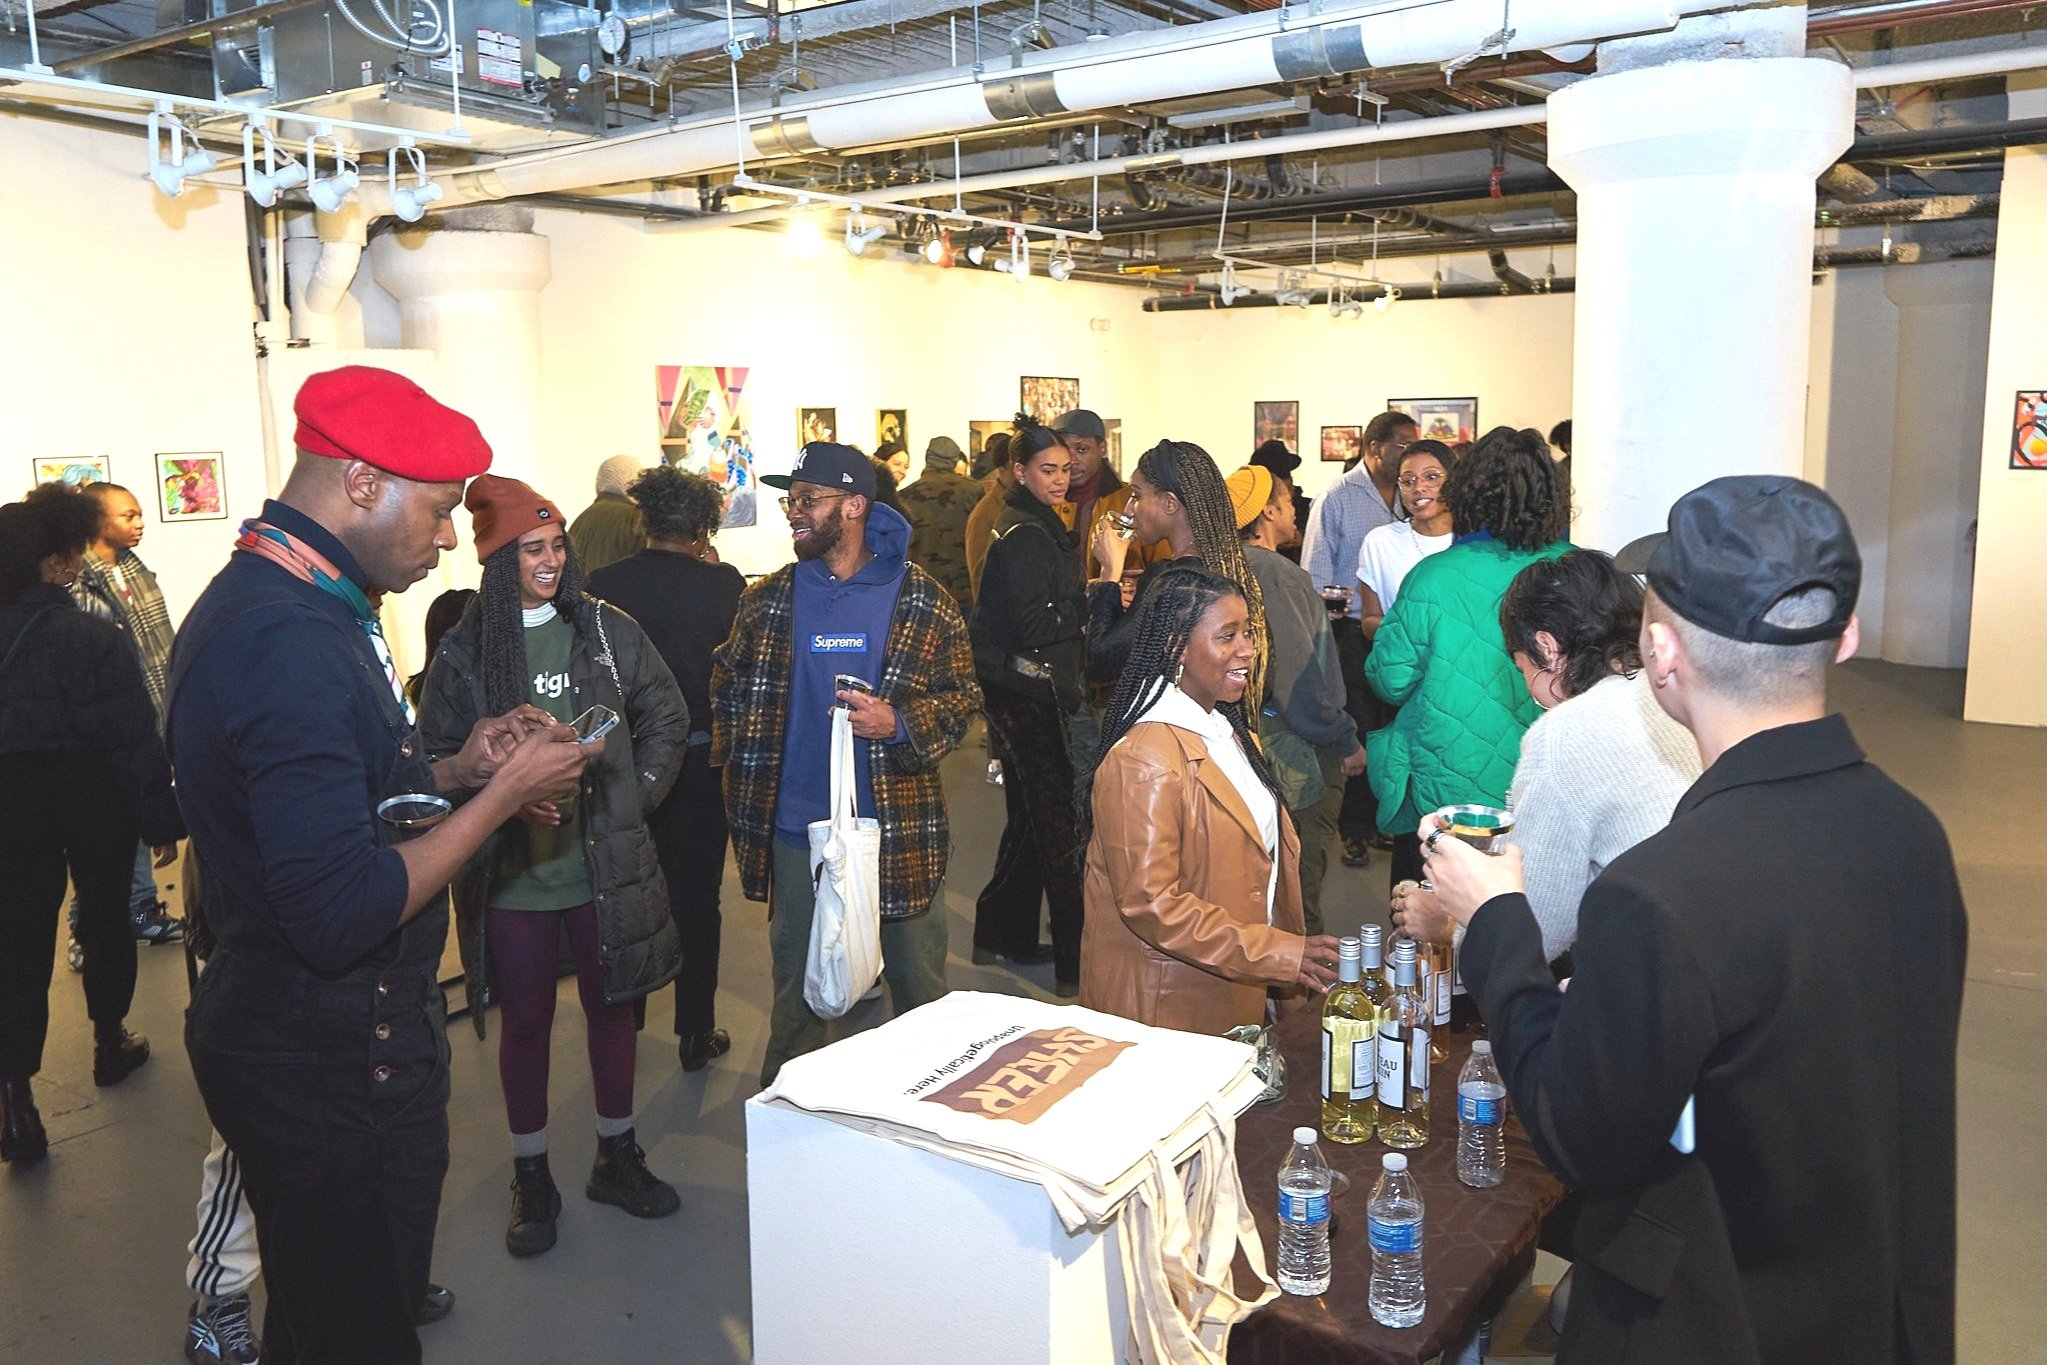 CREATIVES CAME TOGETHER IN BROOKLYN TO CELEBRATE THE OPENING OF